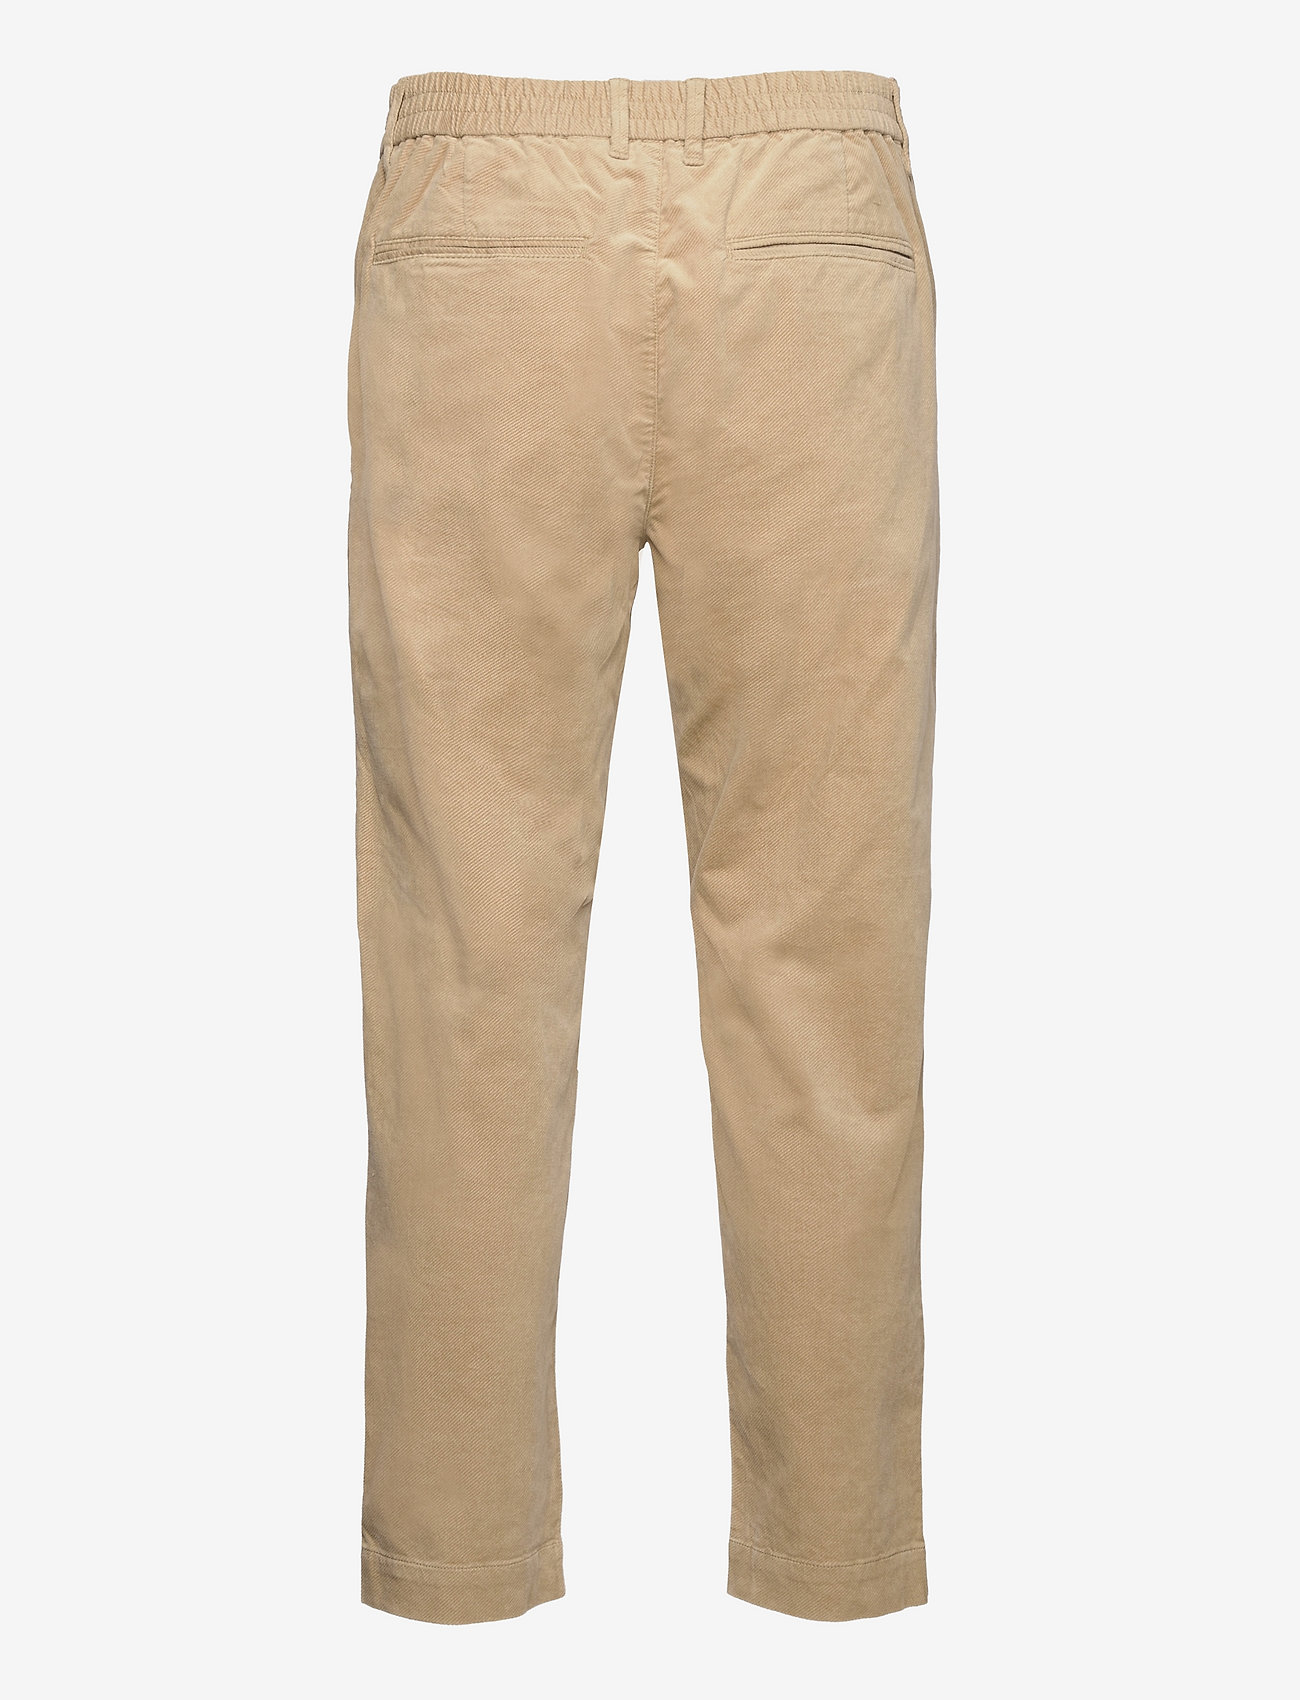 Esprit Collection - Men Pants woven cropped - chino's - beige - 1